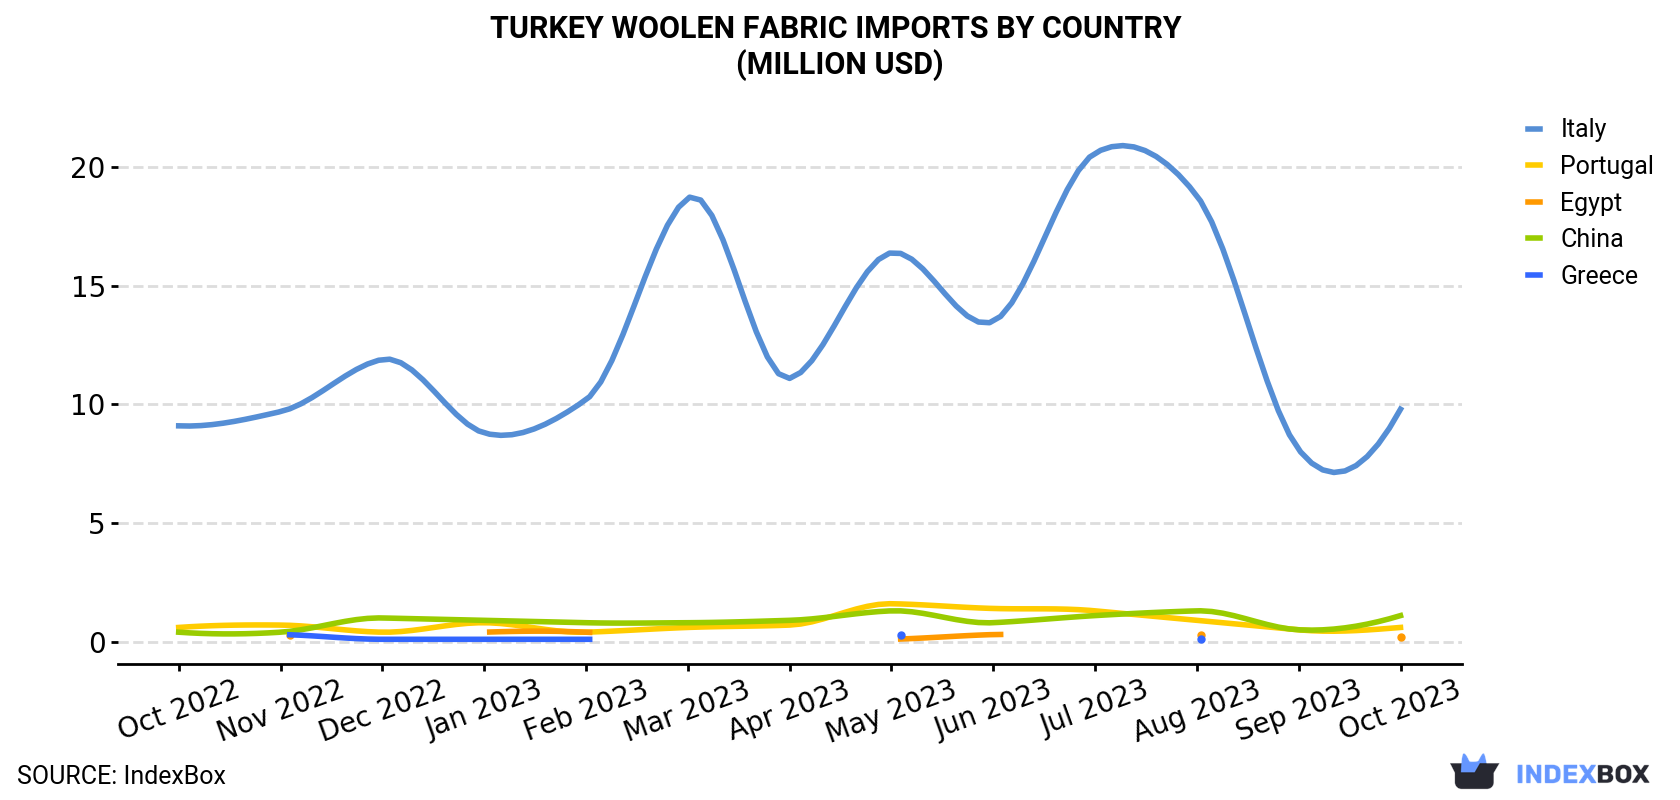 Turkey Woolen Fabric Imports By Country (Million USD)